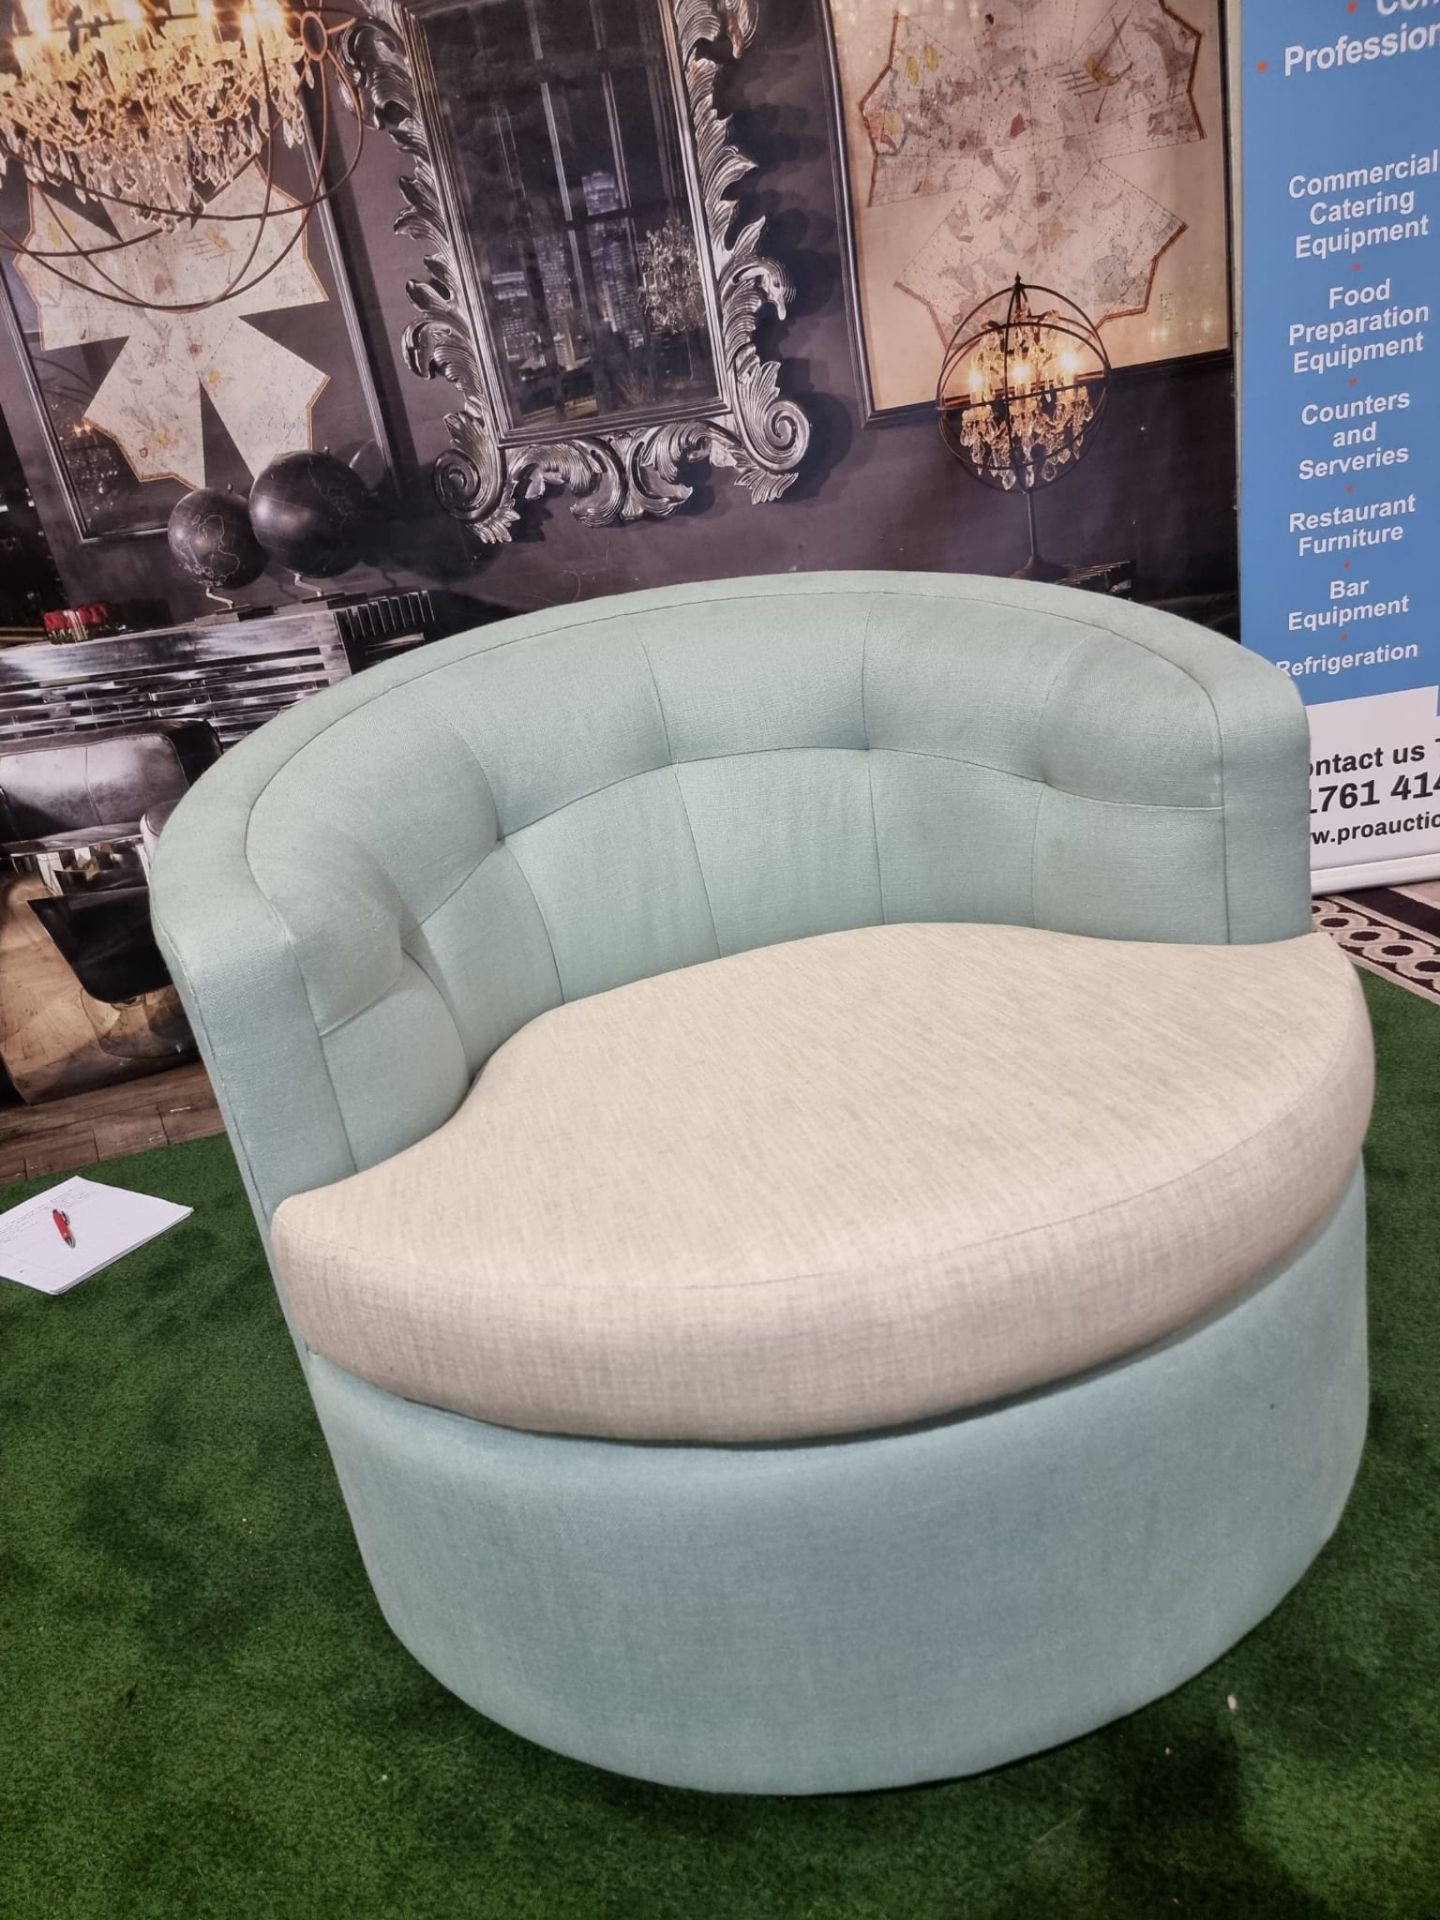 Mayfair Swivel Armchair This Swivel Armchair Makes A Real Statement And Adds A Contemporary Accent - Bild 3 aus 7